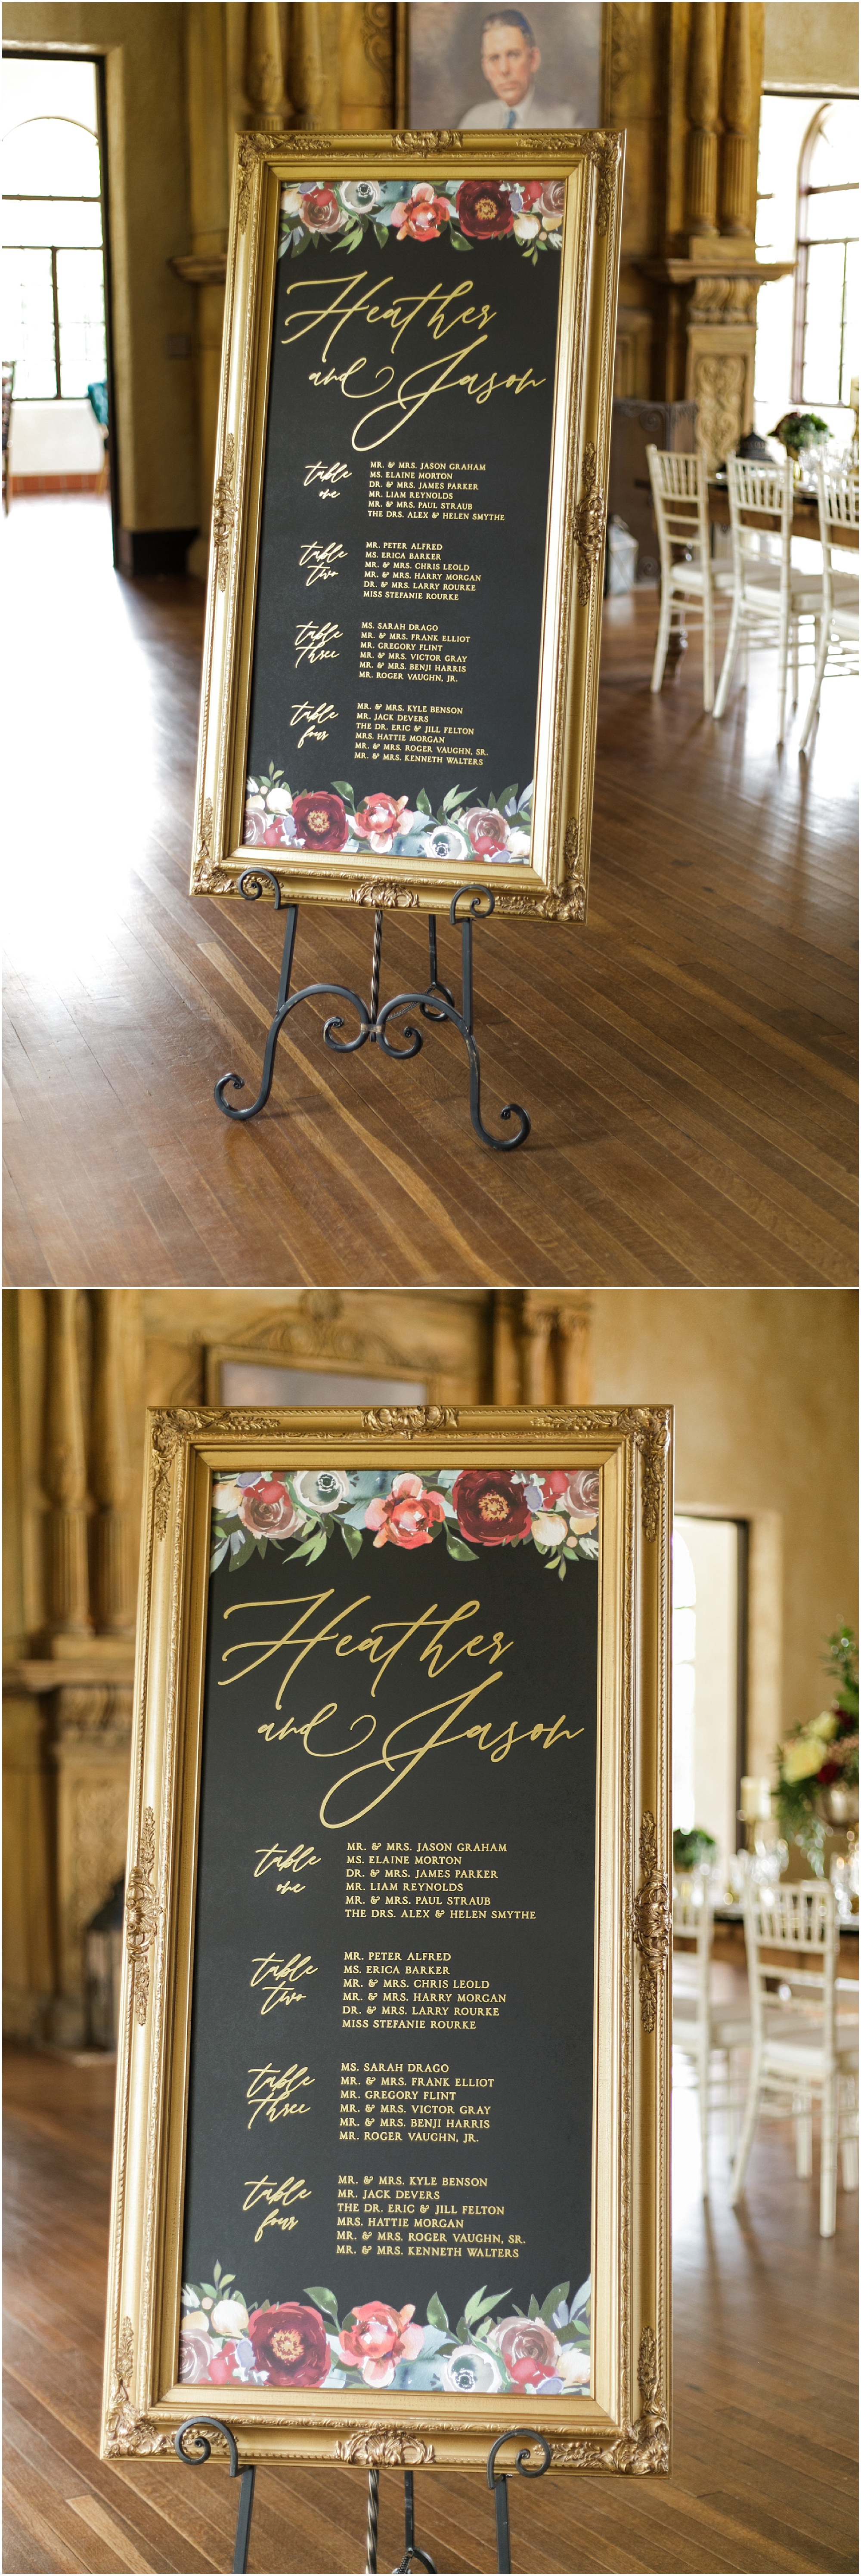 Chalkboard seating chart with floral details.